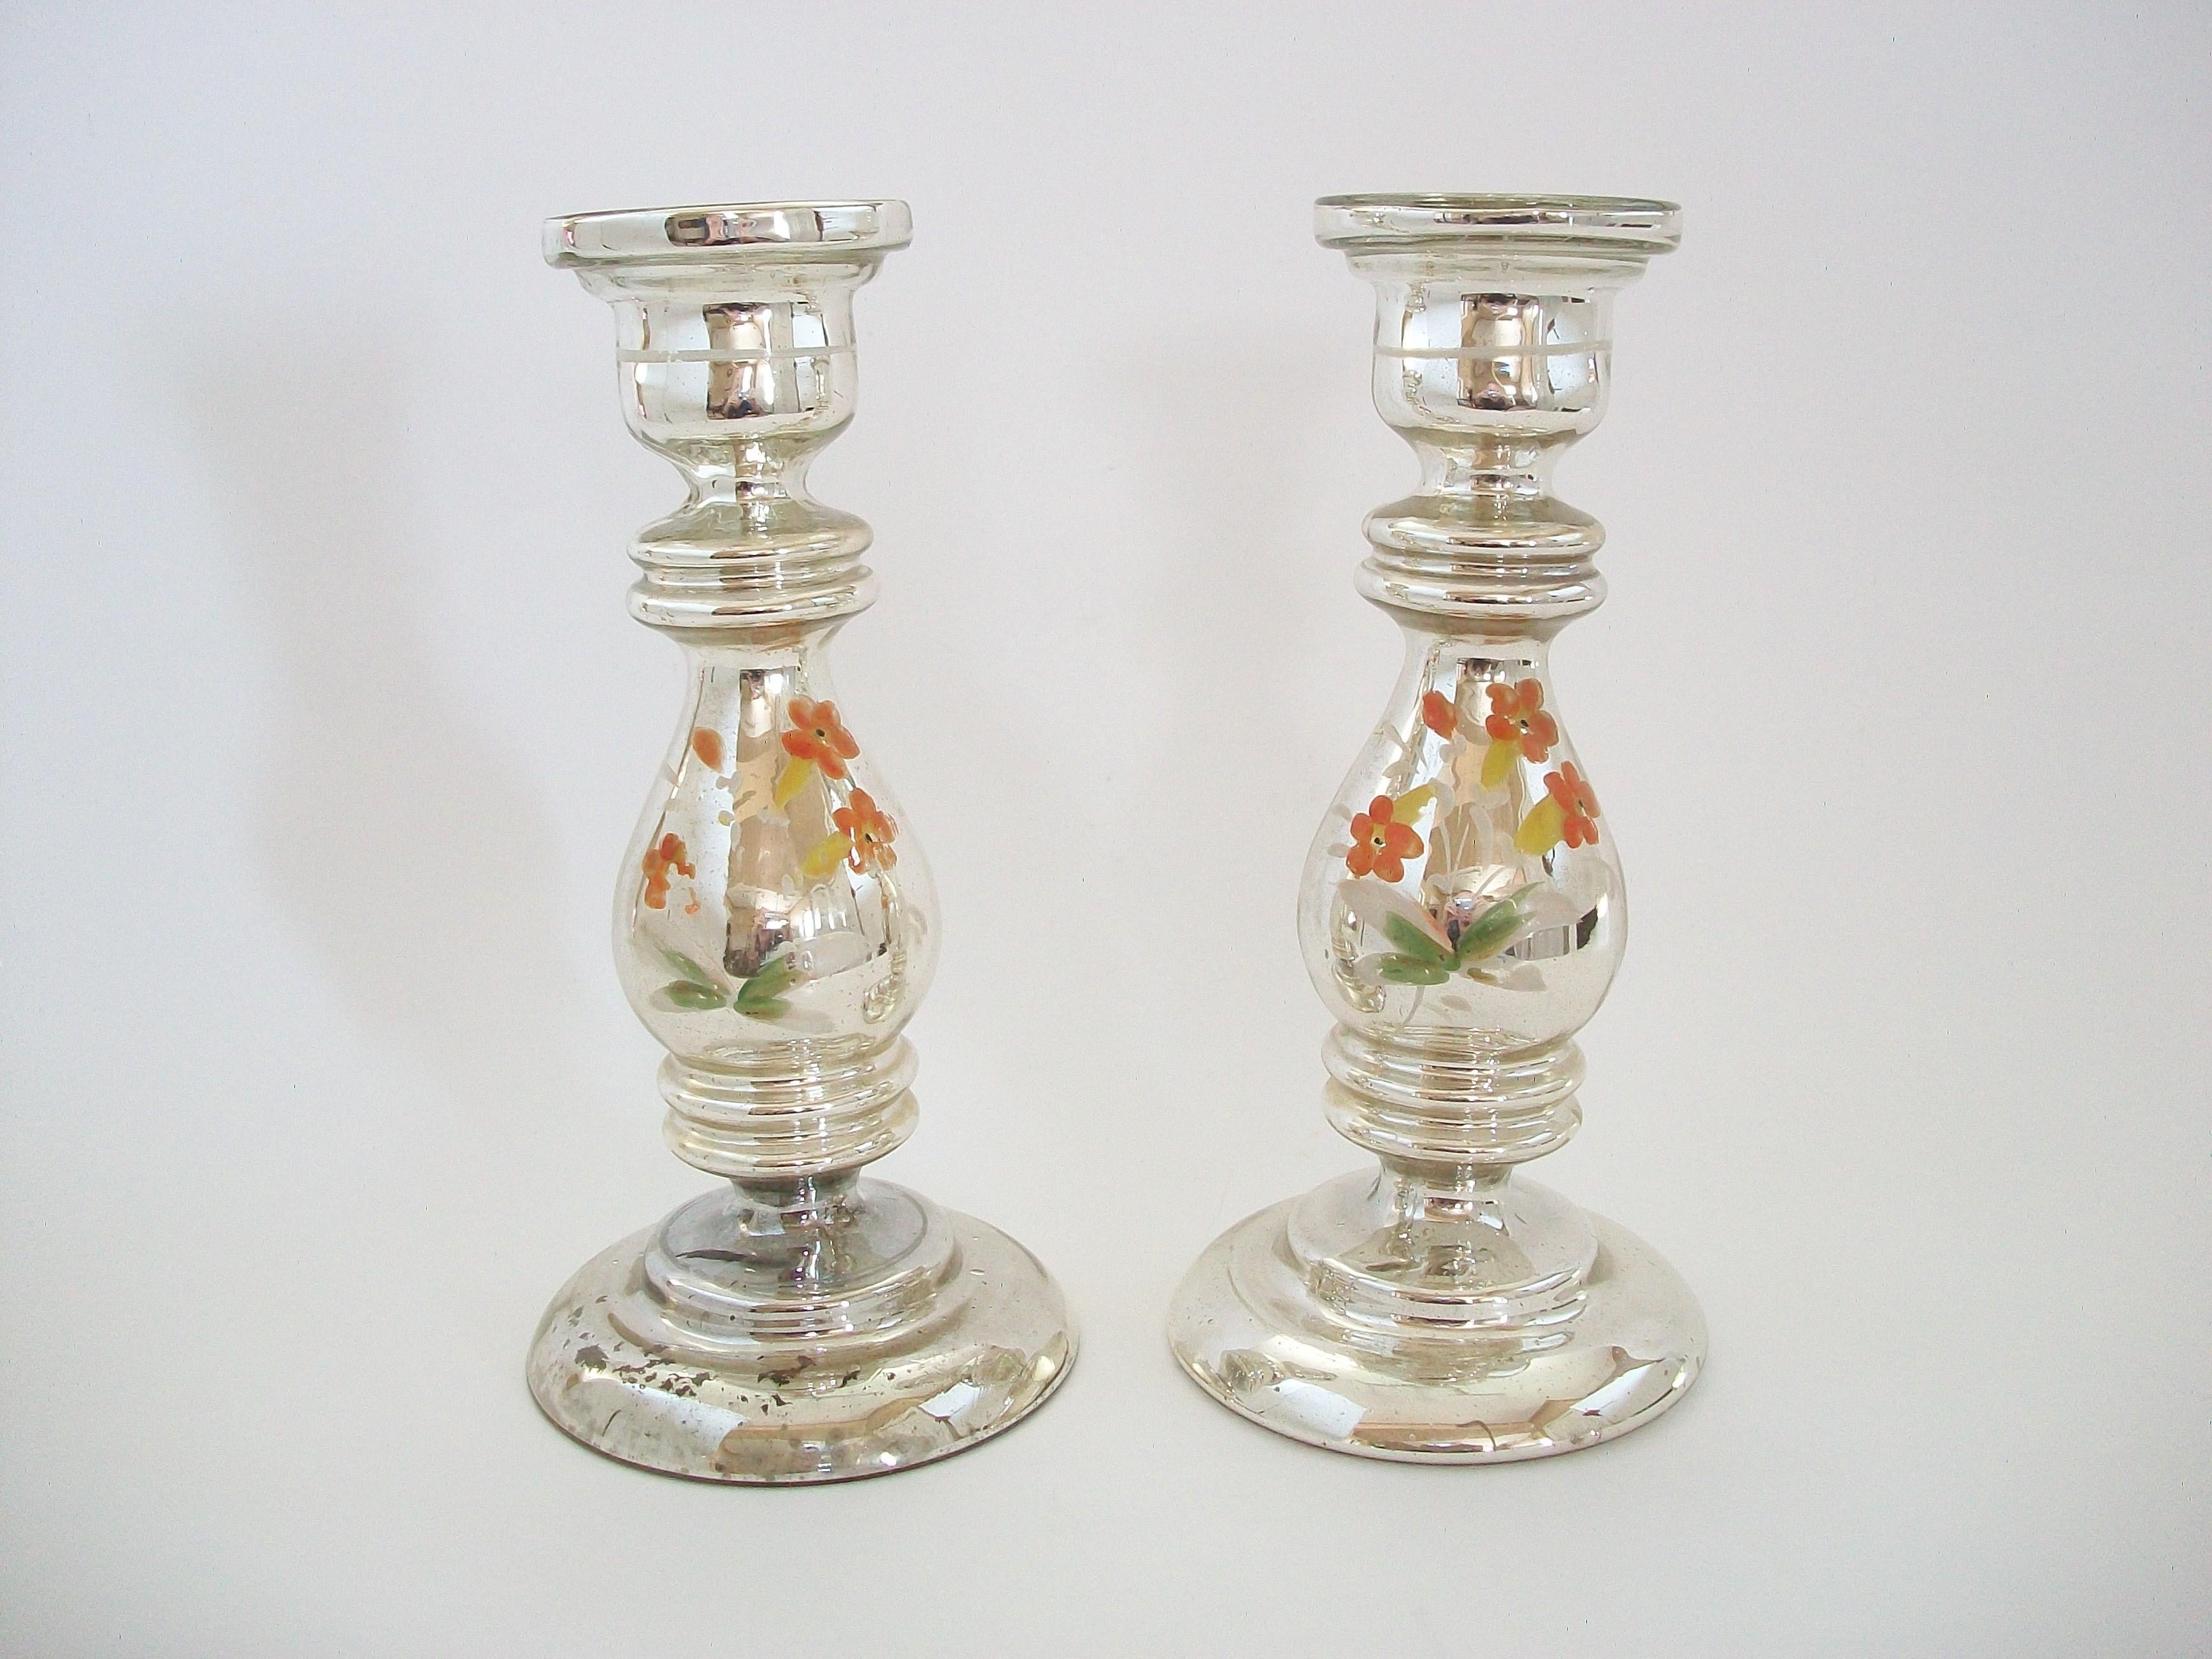 Large antique pair of painted Mercury glass candlesticks - featuring hand painted flowers to the front of each and bands to the sockets - one with original factory sticker - France - circa 1880.

Excellent antique condition - paint loss - minor